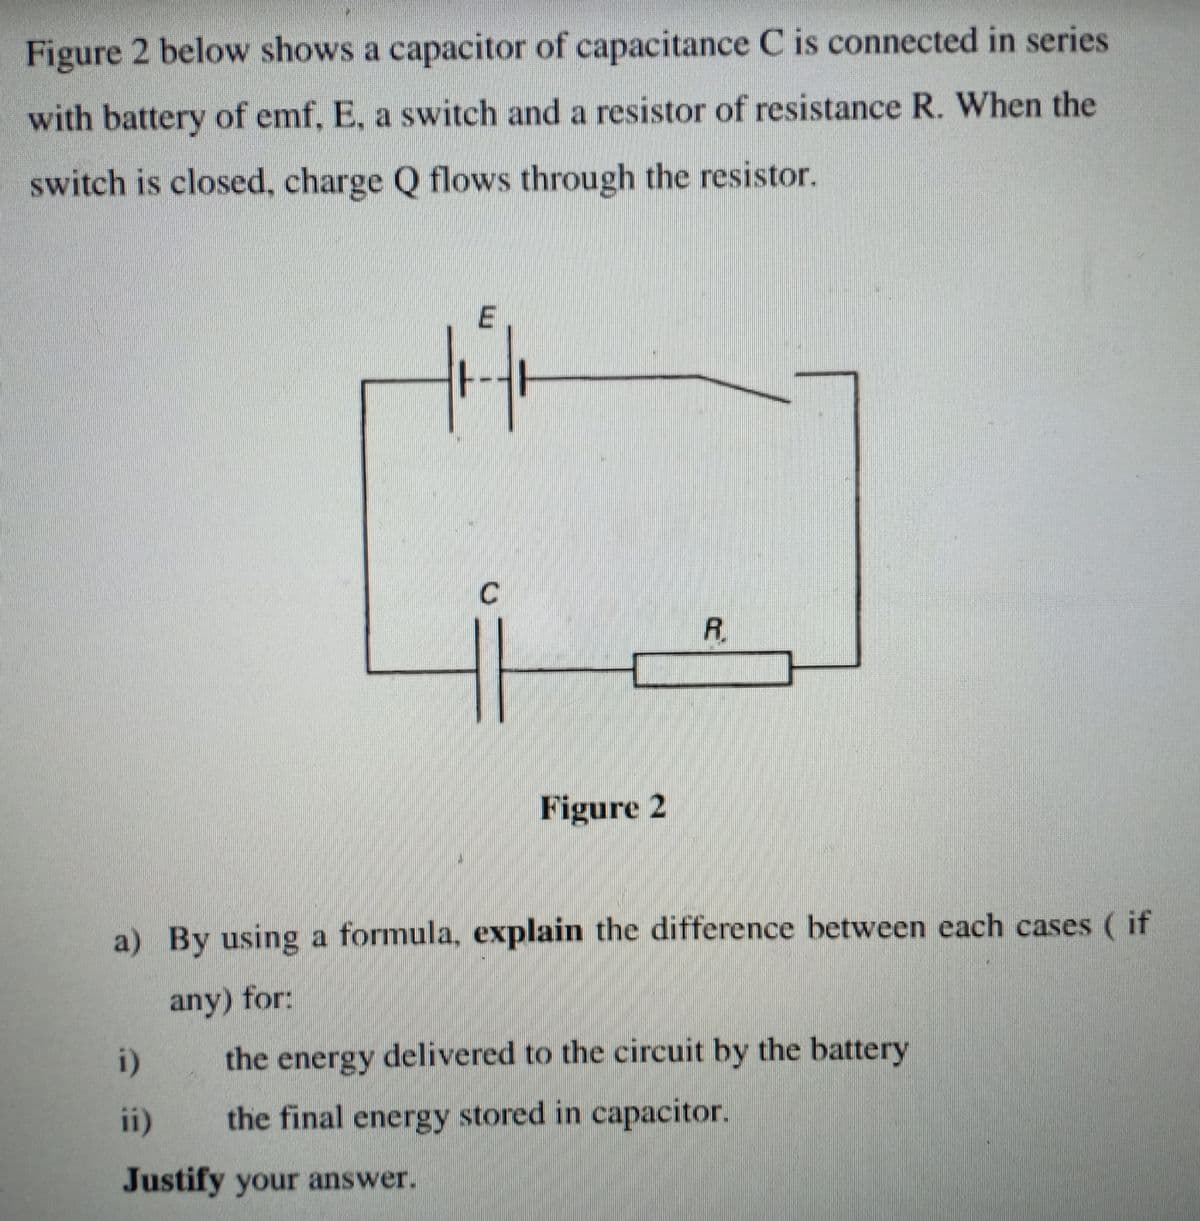 Figure 2 below shows a capacitor of capacitance C is connected in series
with battery of emf, E, a switch and a resistor of resistance R. When the
switch is closed, charge Q flows through the resistor.
R.
Figure 2
a) By using a formula, explain the difference between each cases ( if
any) for:
i)
the energy delivered to the circuit by the battery
ii)
the final energy stored in capacitor.
Justify your answer.
